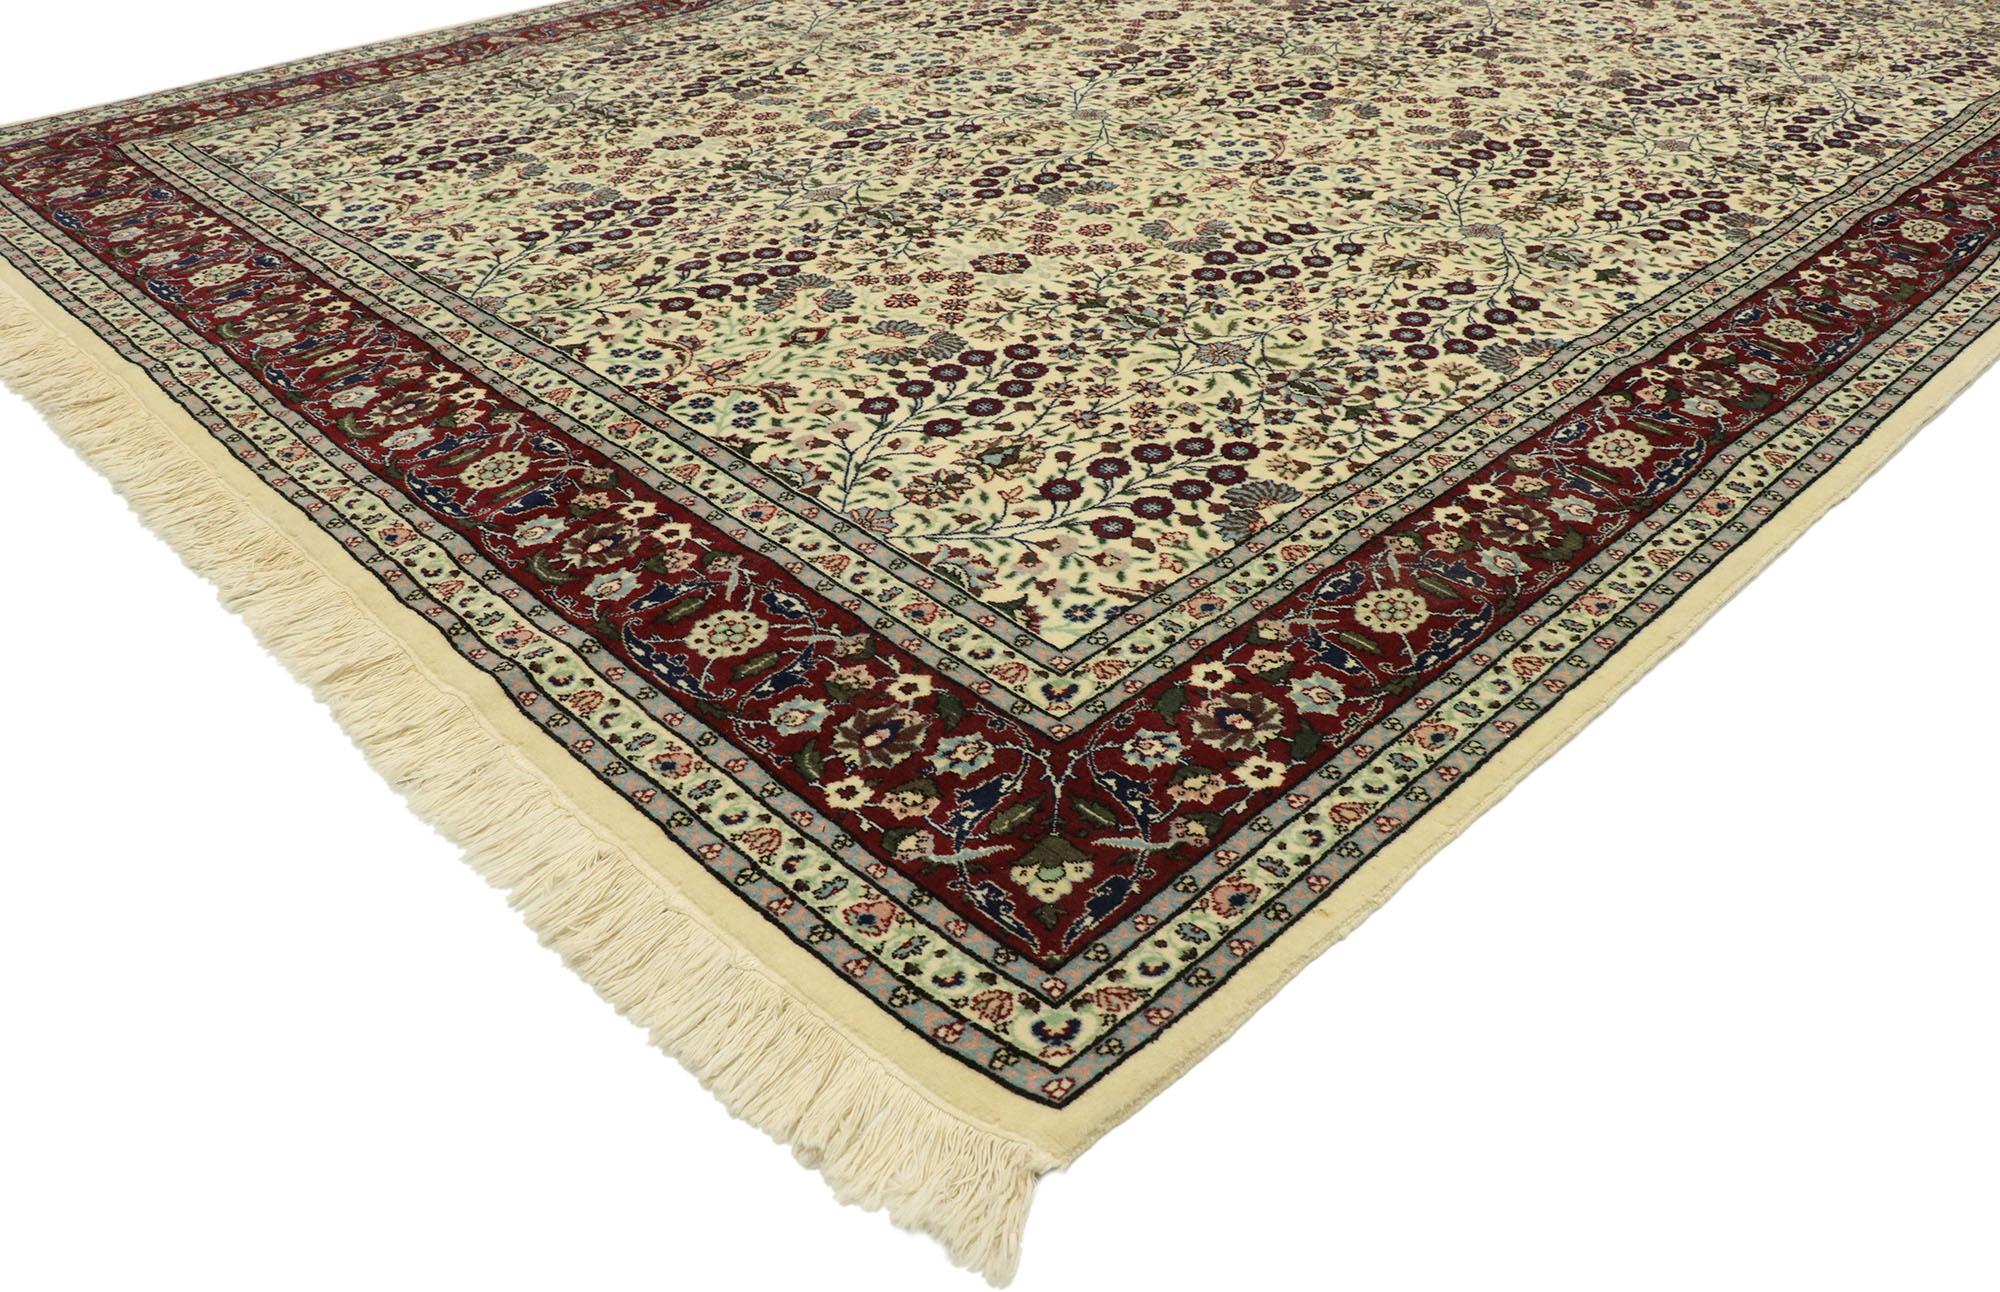 77534, vintage Turkish Harker Millefleur rug with Victorian style. With a timeless floral pattern and refined elegance, this hand knotted wool vintage Turkish Harker millefleur rug beautifully embodies Victorian style. The abrashed field is covered